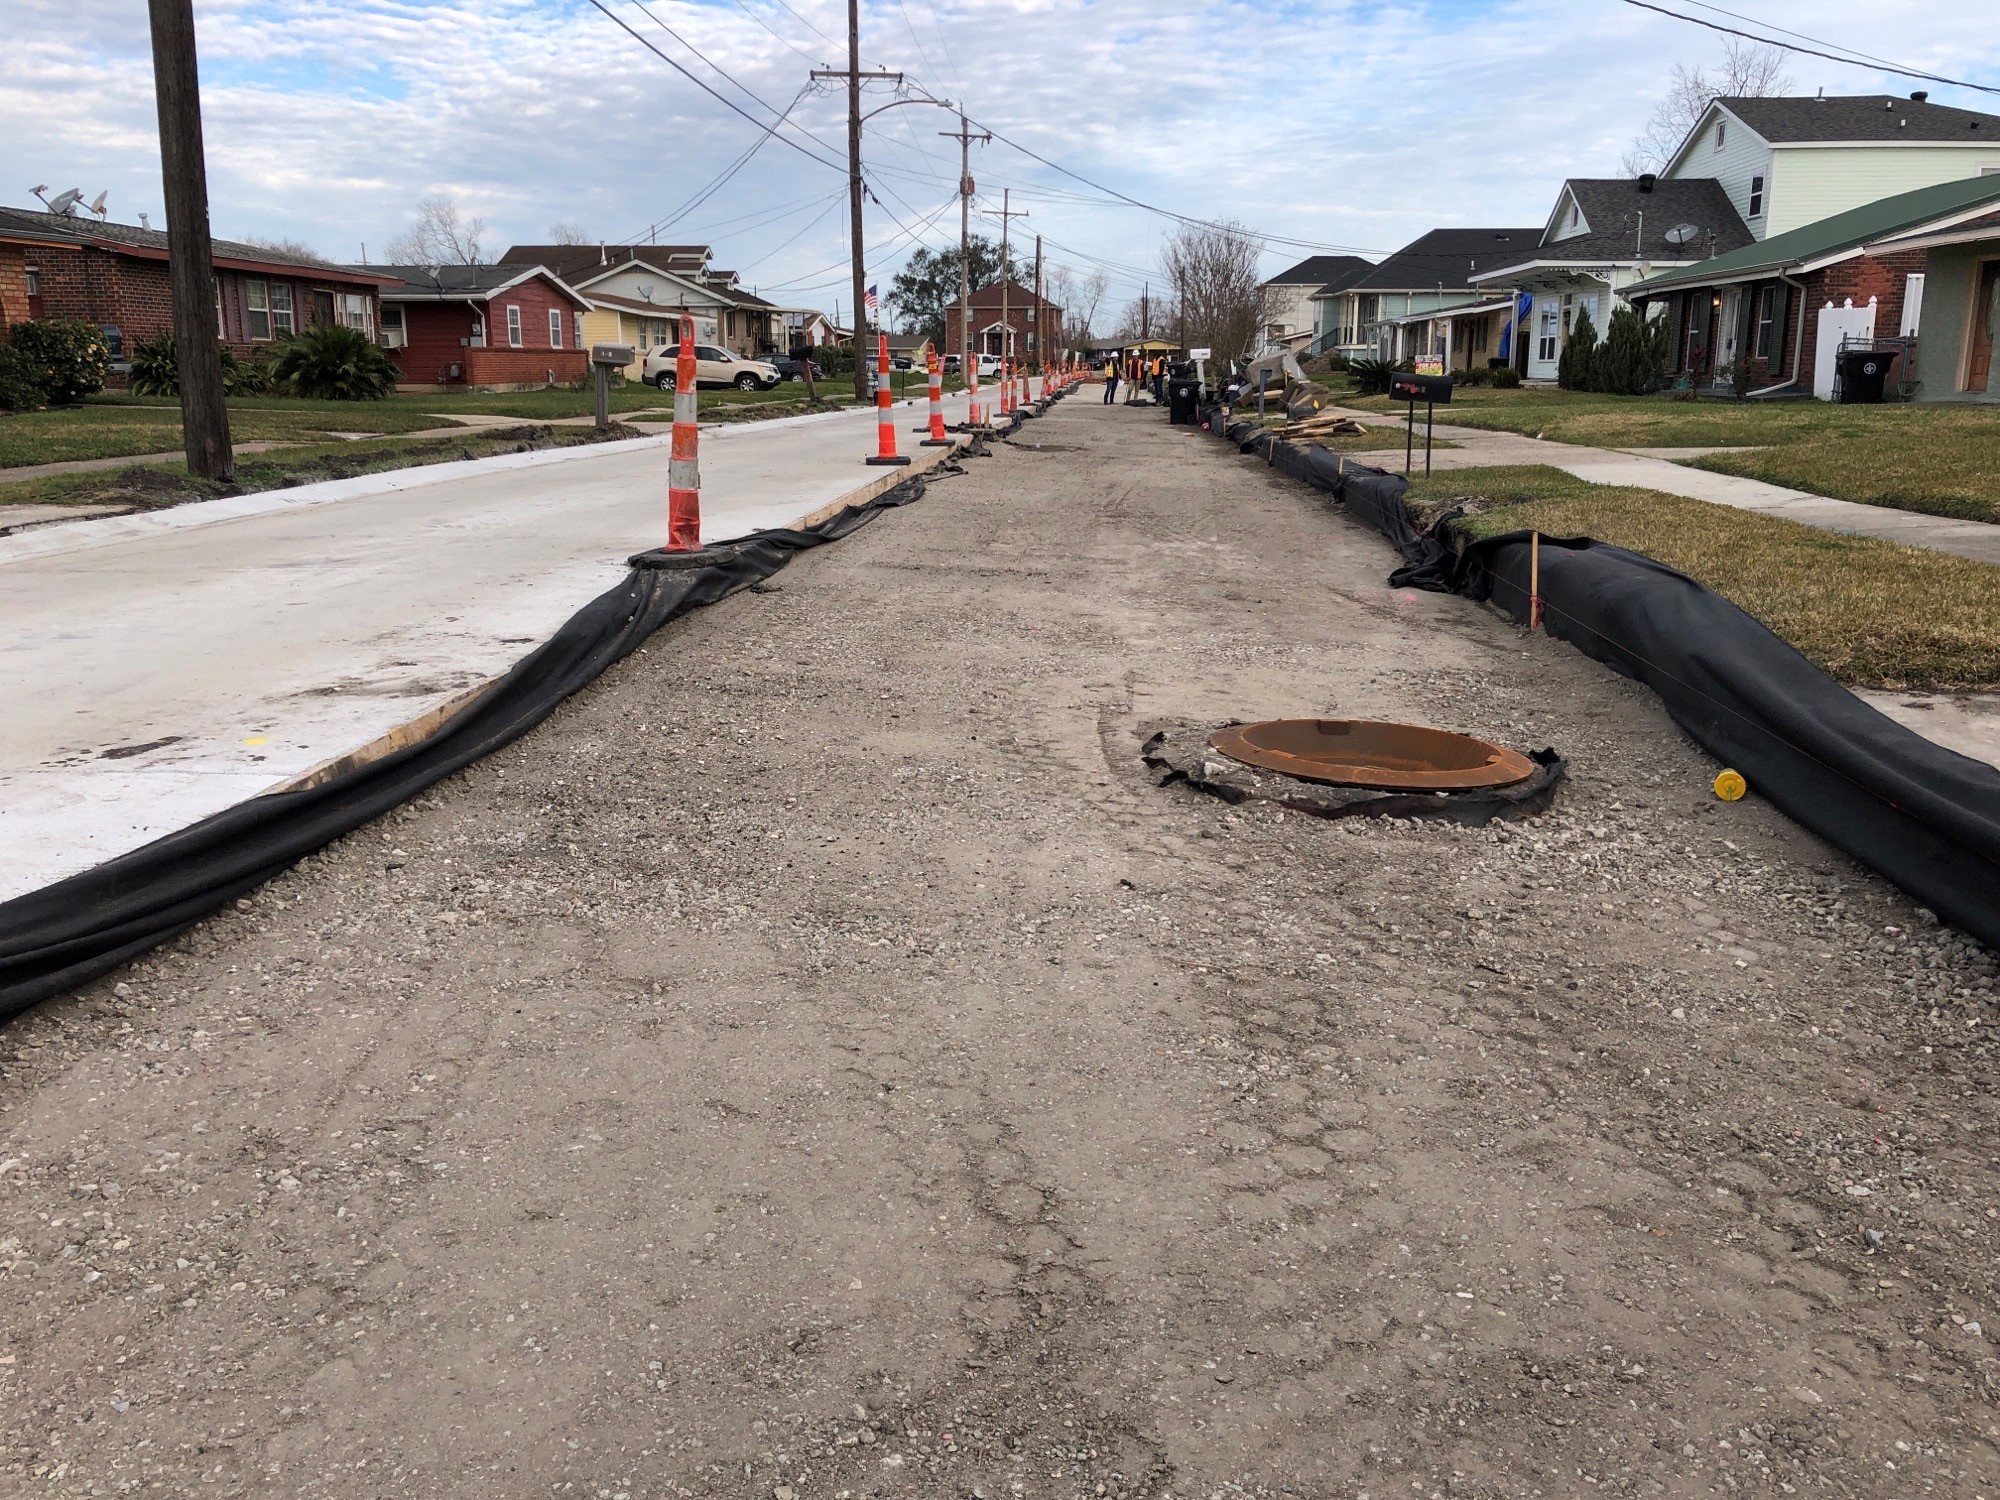 PONTCHARTRAIN PARK GROUP A REACHES MILESTONES WITH 35 PERCENT ROADWAY AND 80 PERCENT WATERLINE WORK COMPLETION